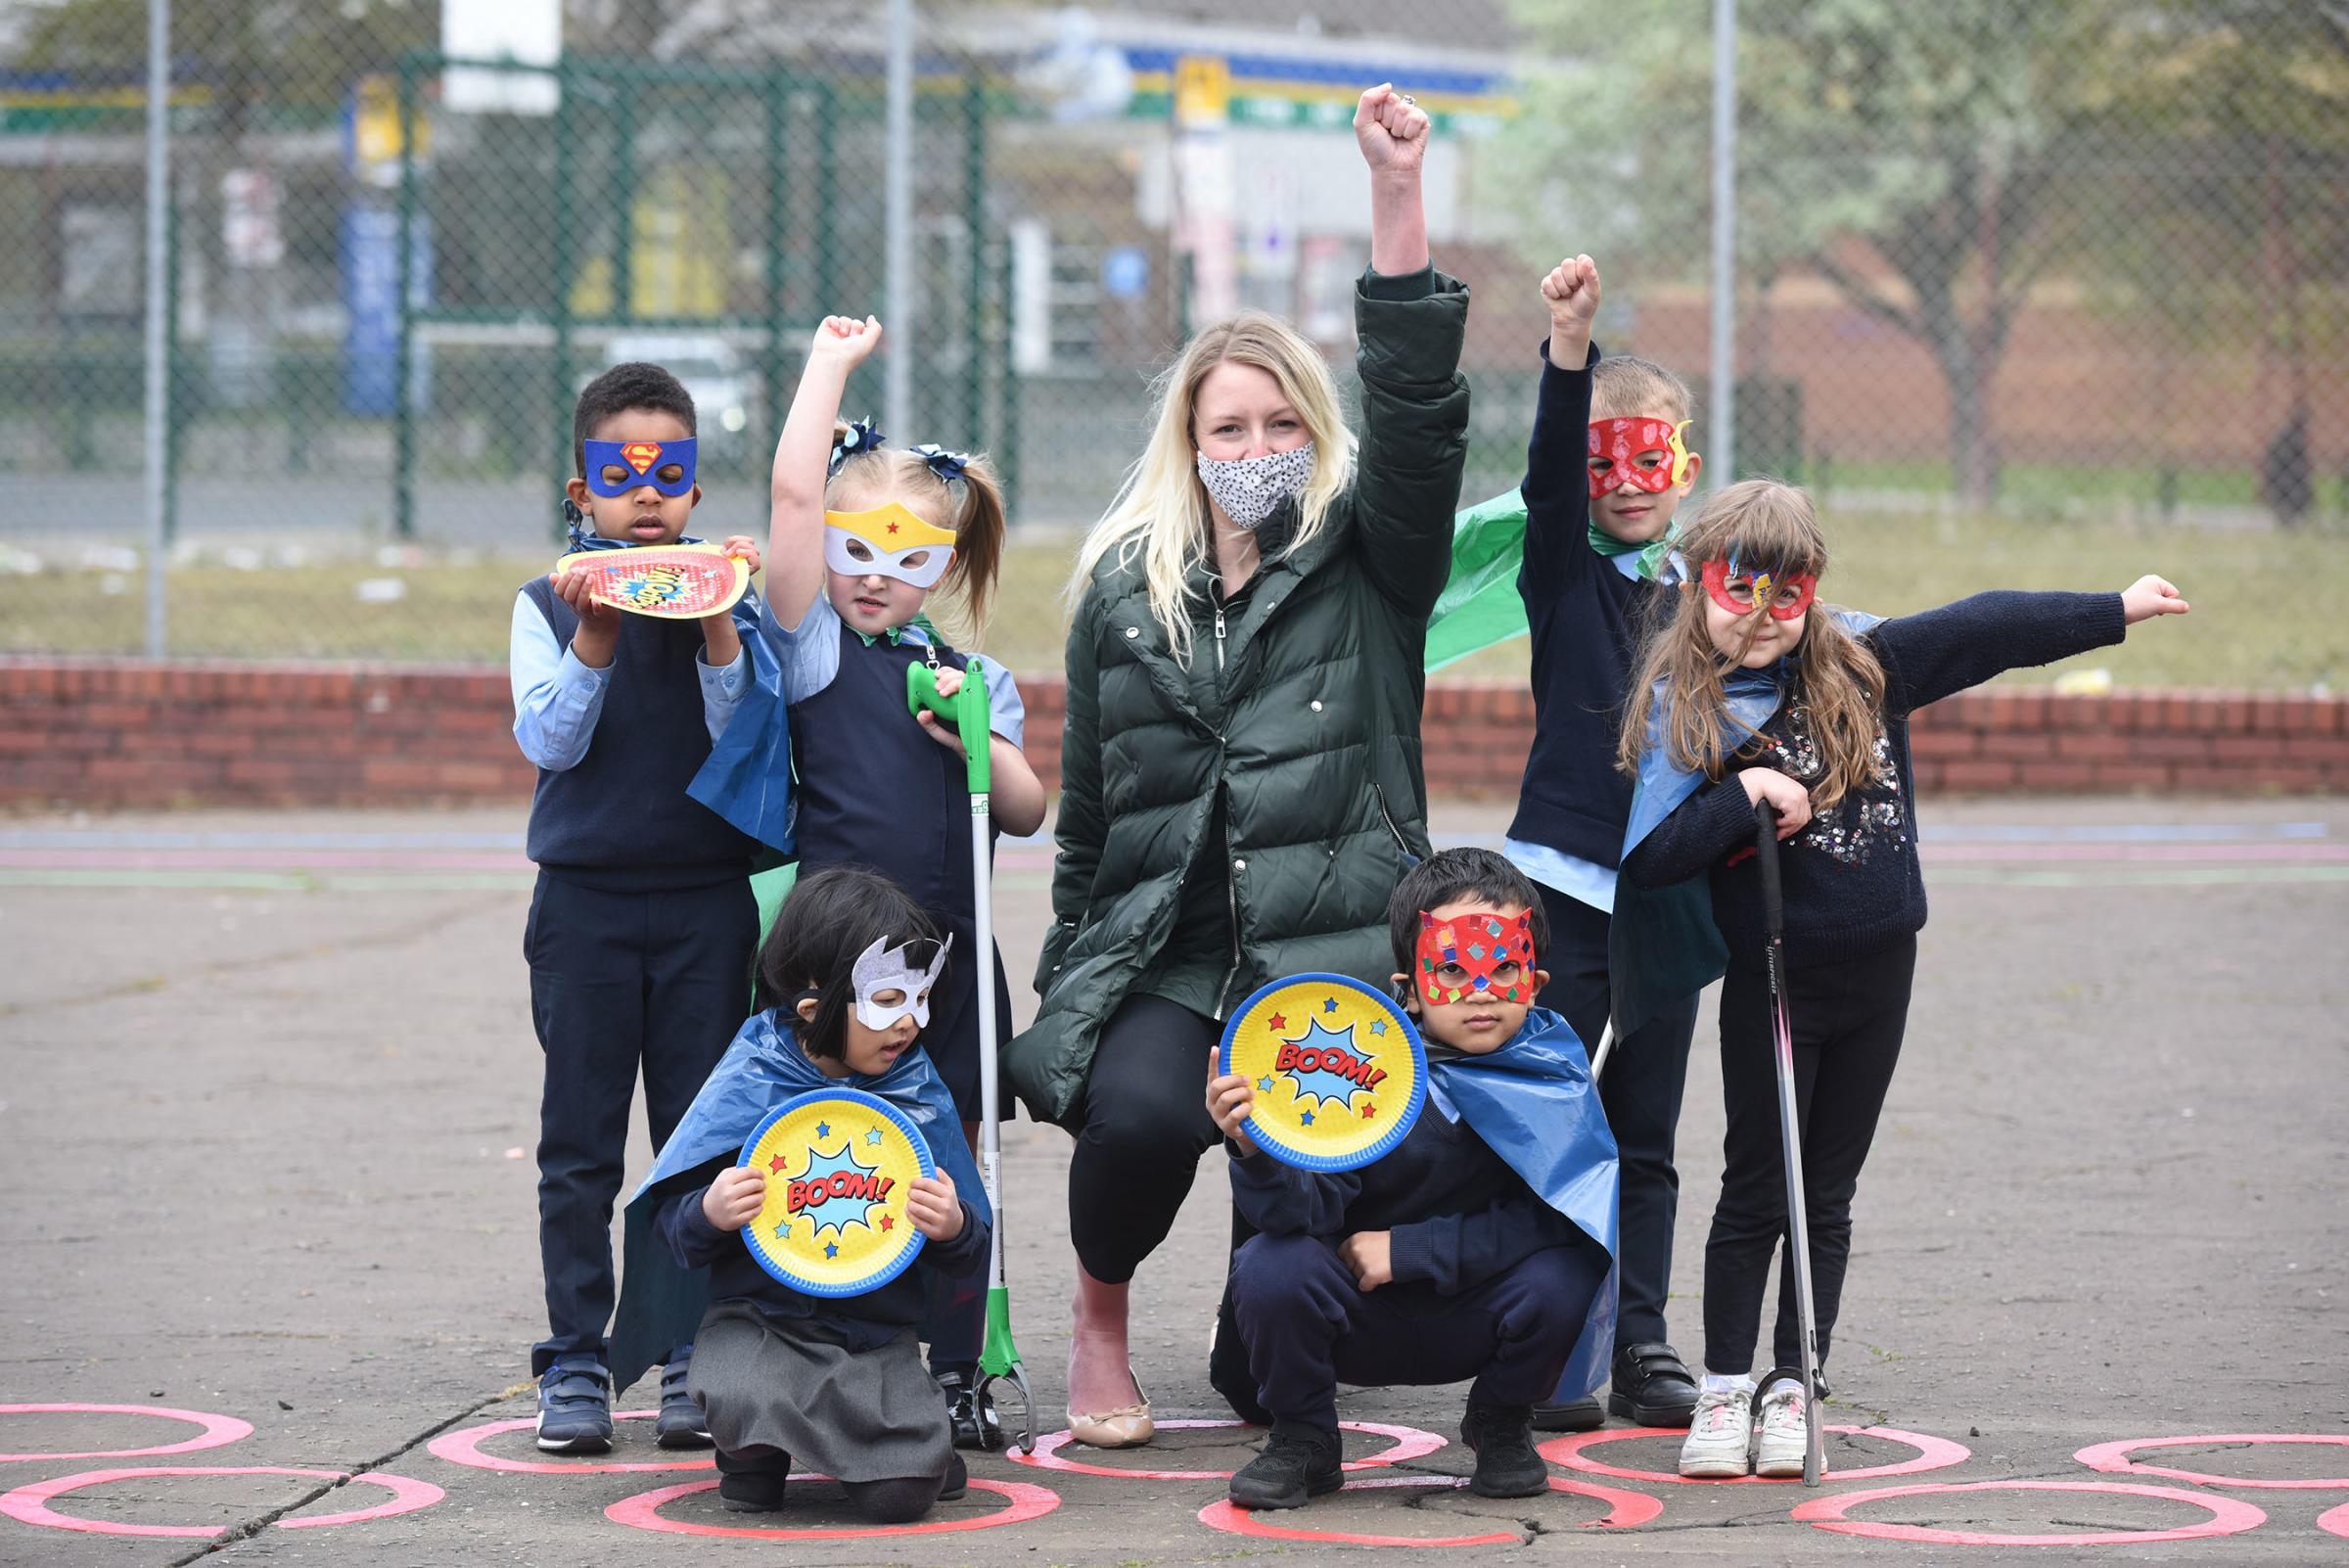 The mighty Litterless Superheroes from St Josephs Primary with Principal Teacher Laura Slinger. Pic: Kirsty Anderson/Glasgow Times